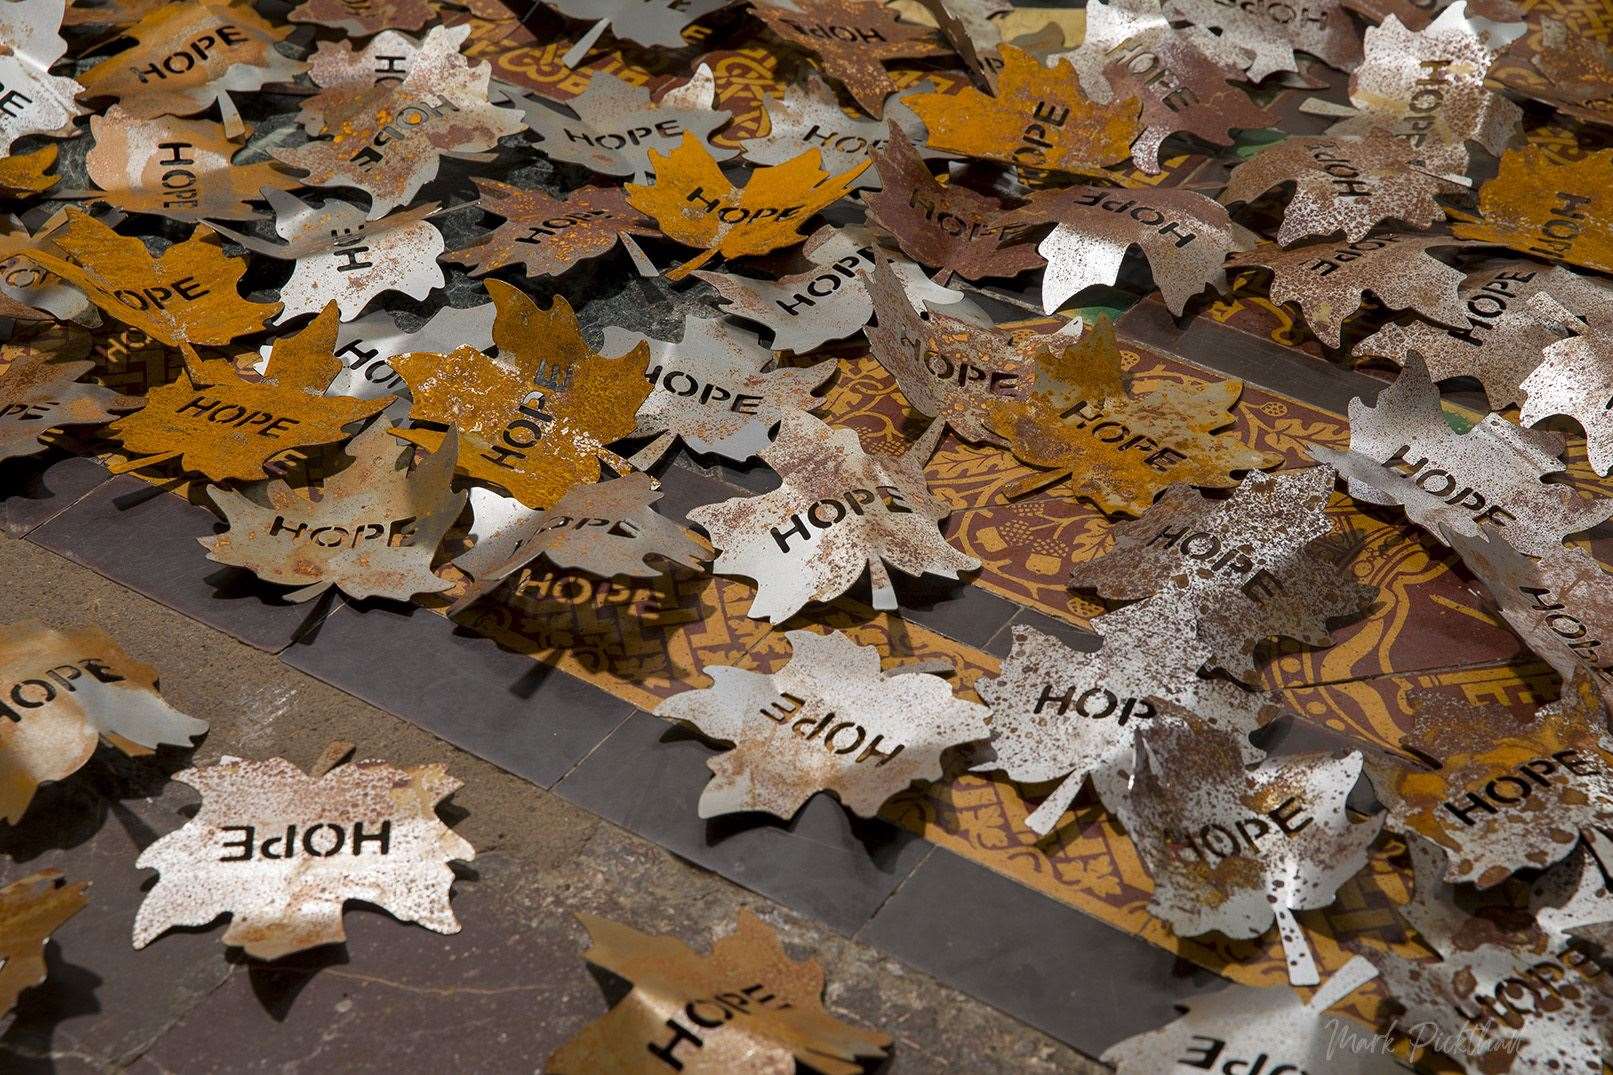 Each metal leaf is engraved with the word hope Photo: Mark Pickthall